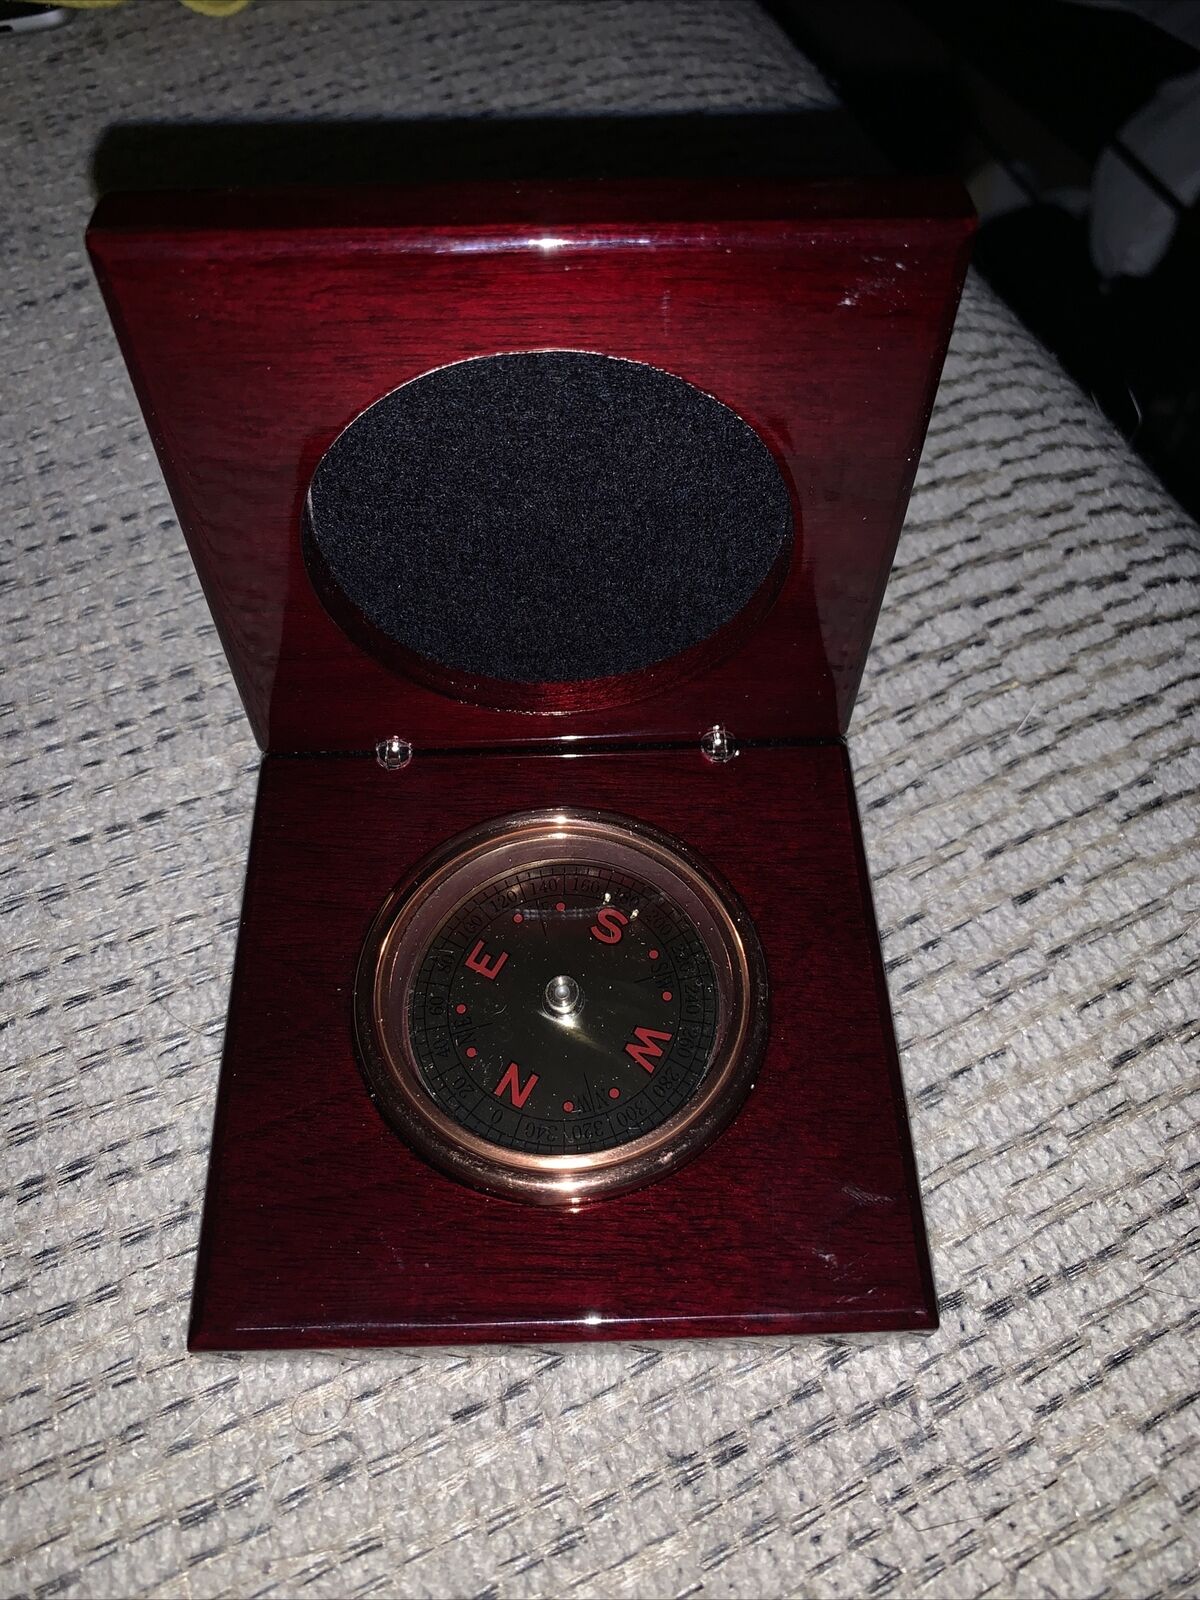 Vintage AITG Compass Desk Top Paperweight In Rosewood Box